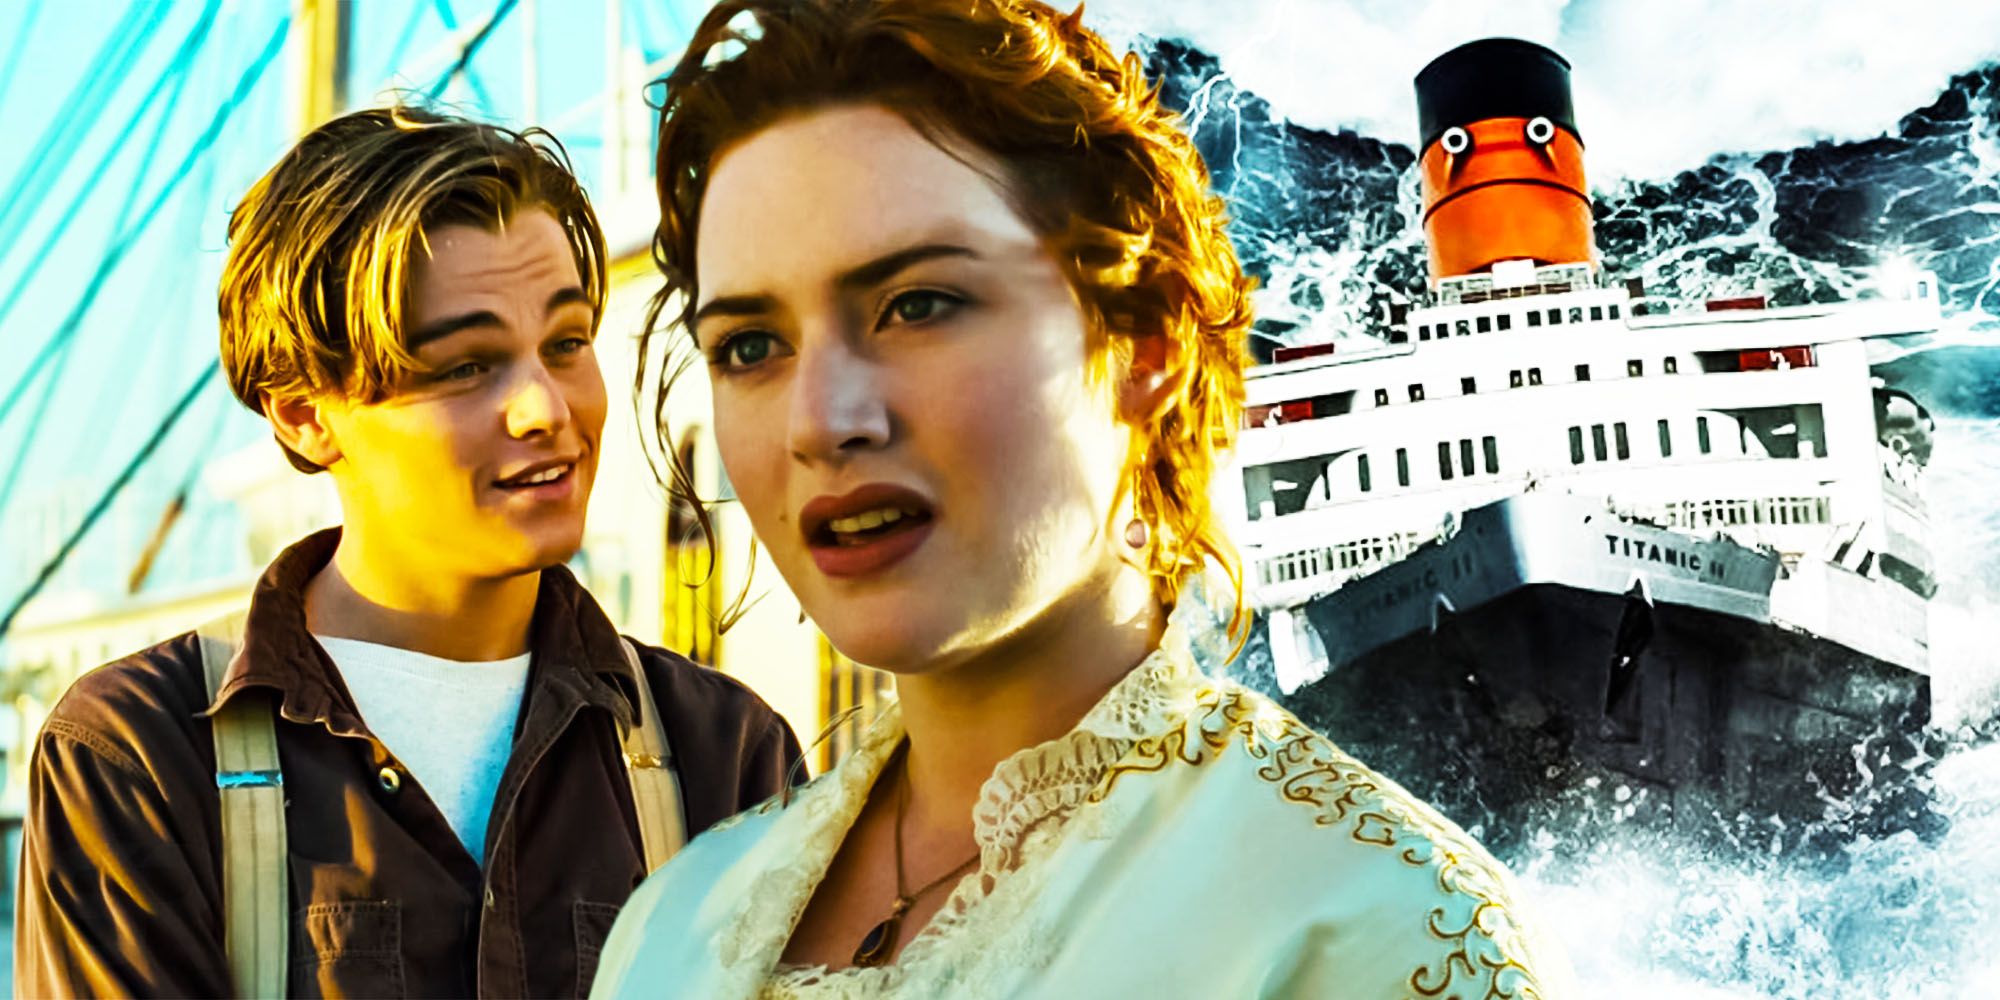 bombe Onkel eller Mister en gang Yes, Titanic 2 Exists: Is It Supposed To Be A Sequel?!